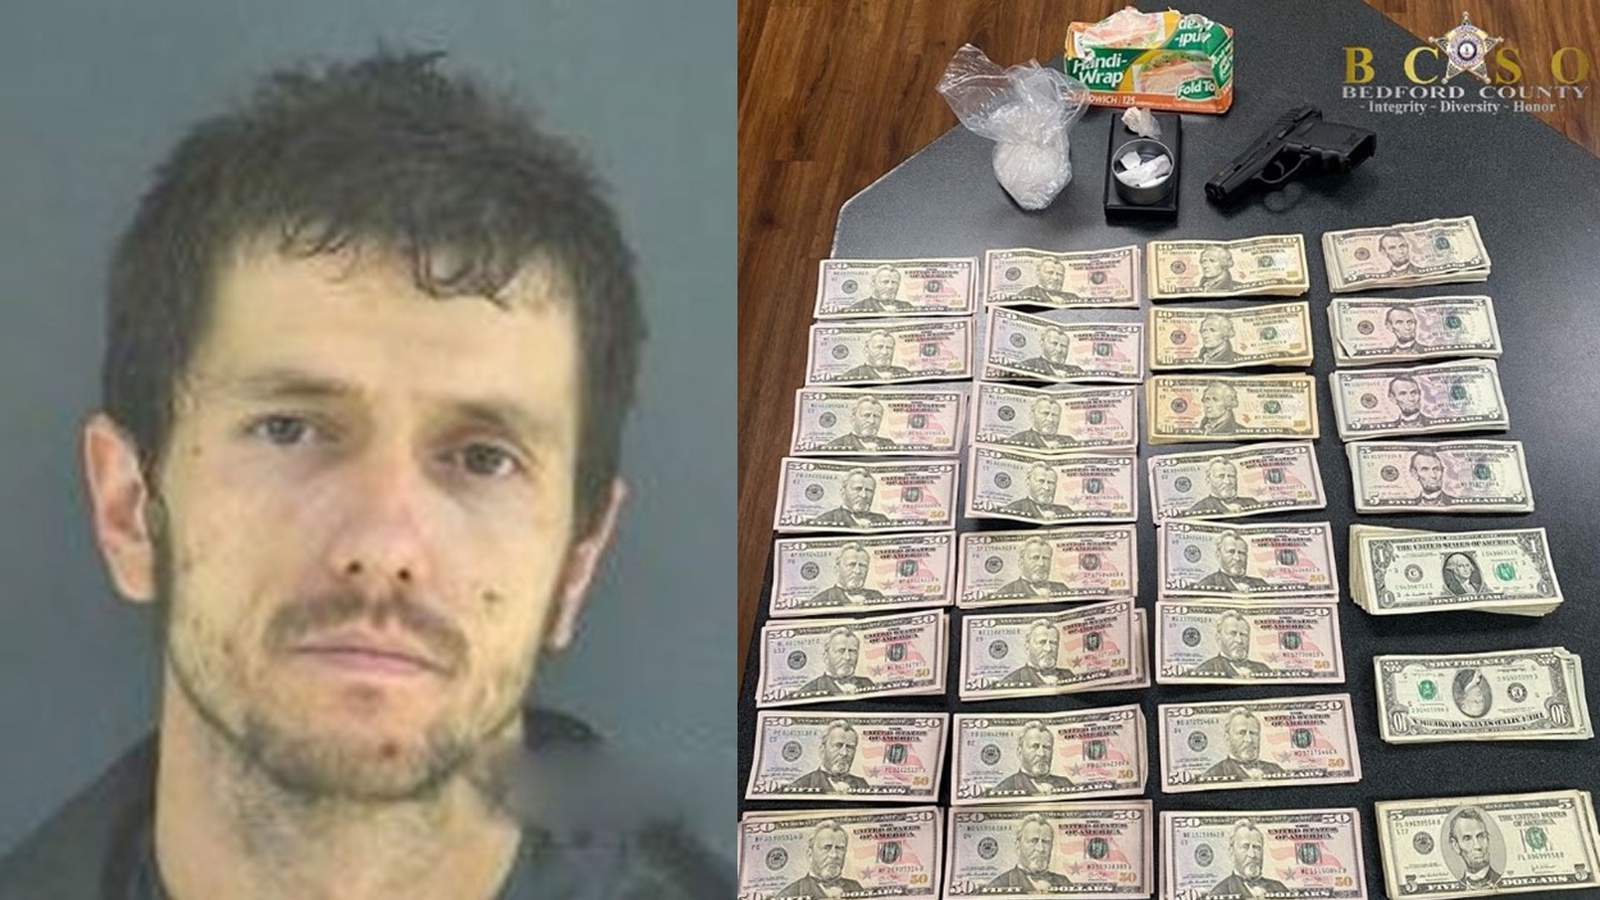 Drugs, thousands in cash seized in Bedford County traffic stop turned home search